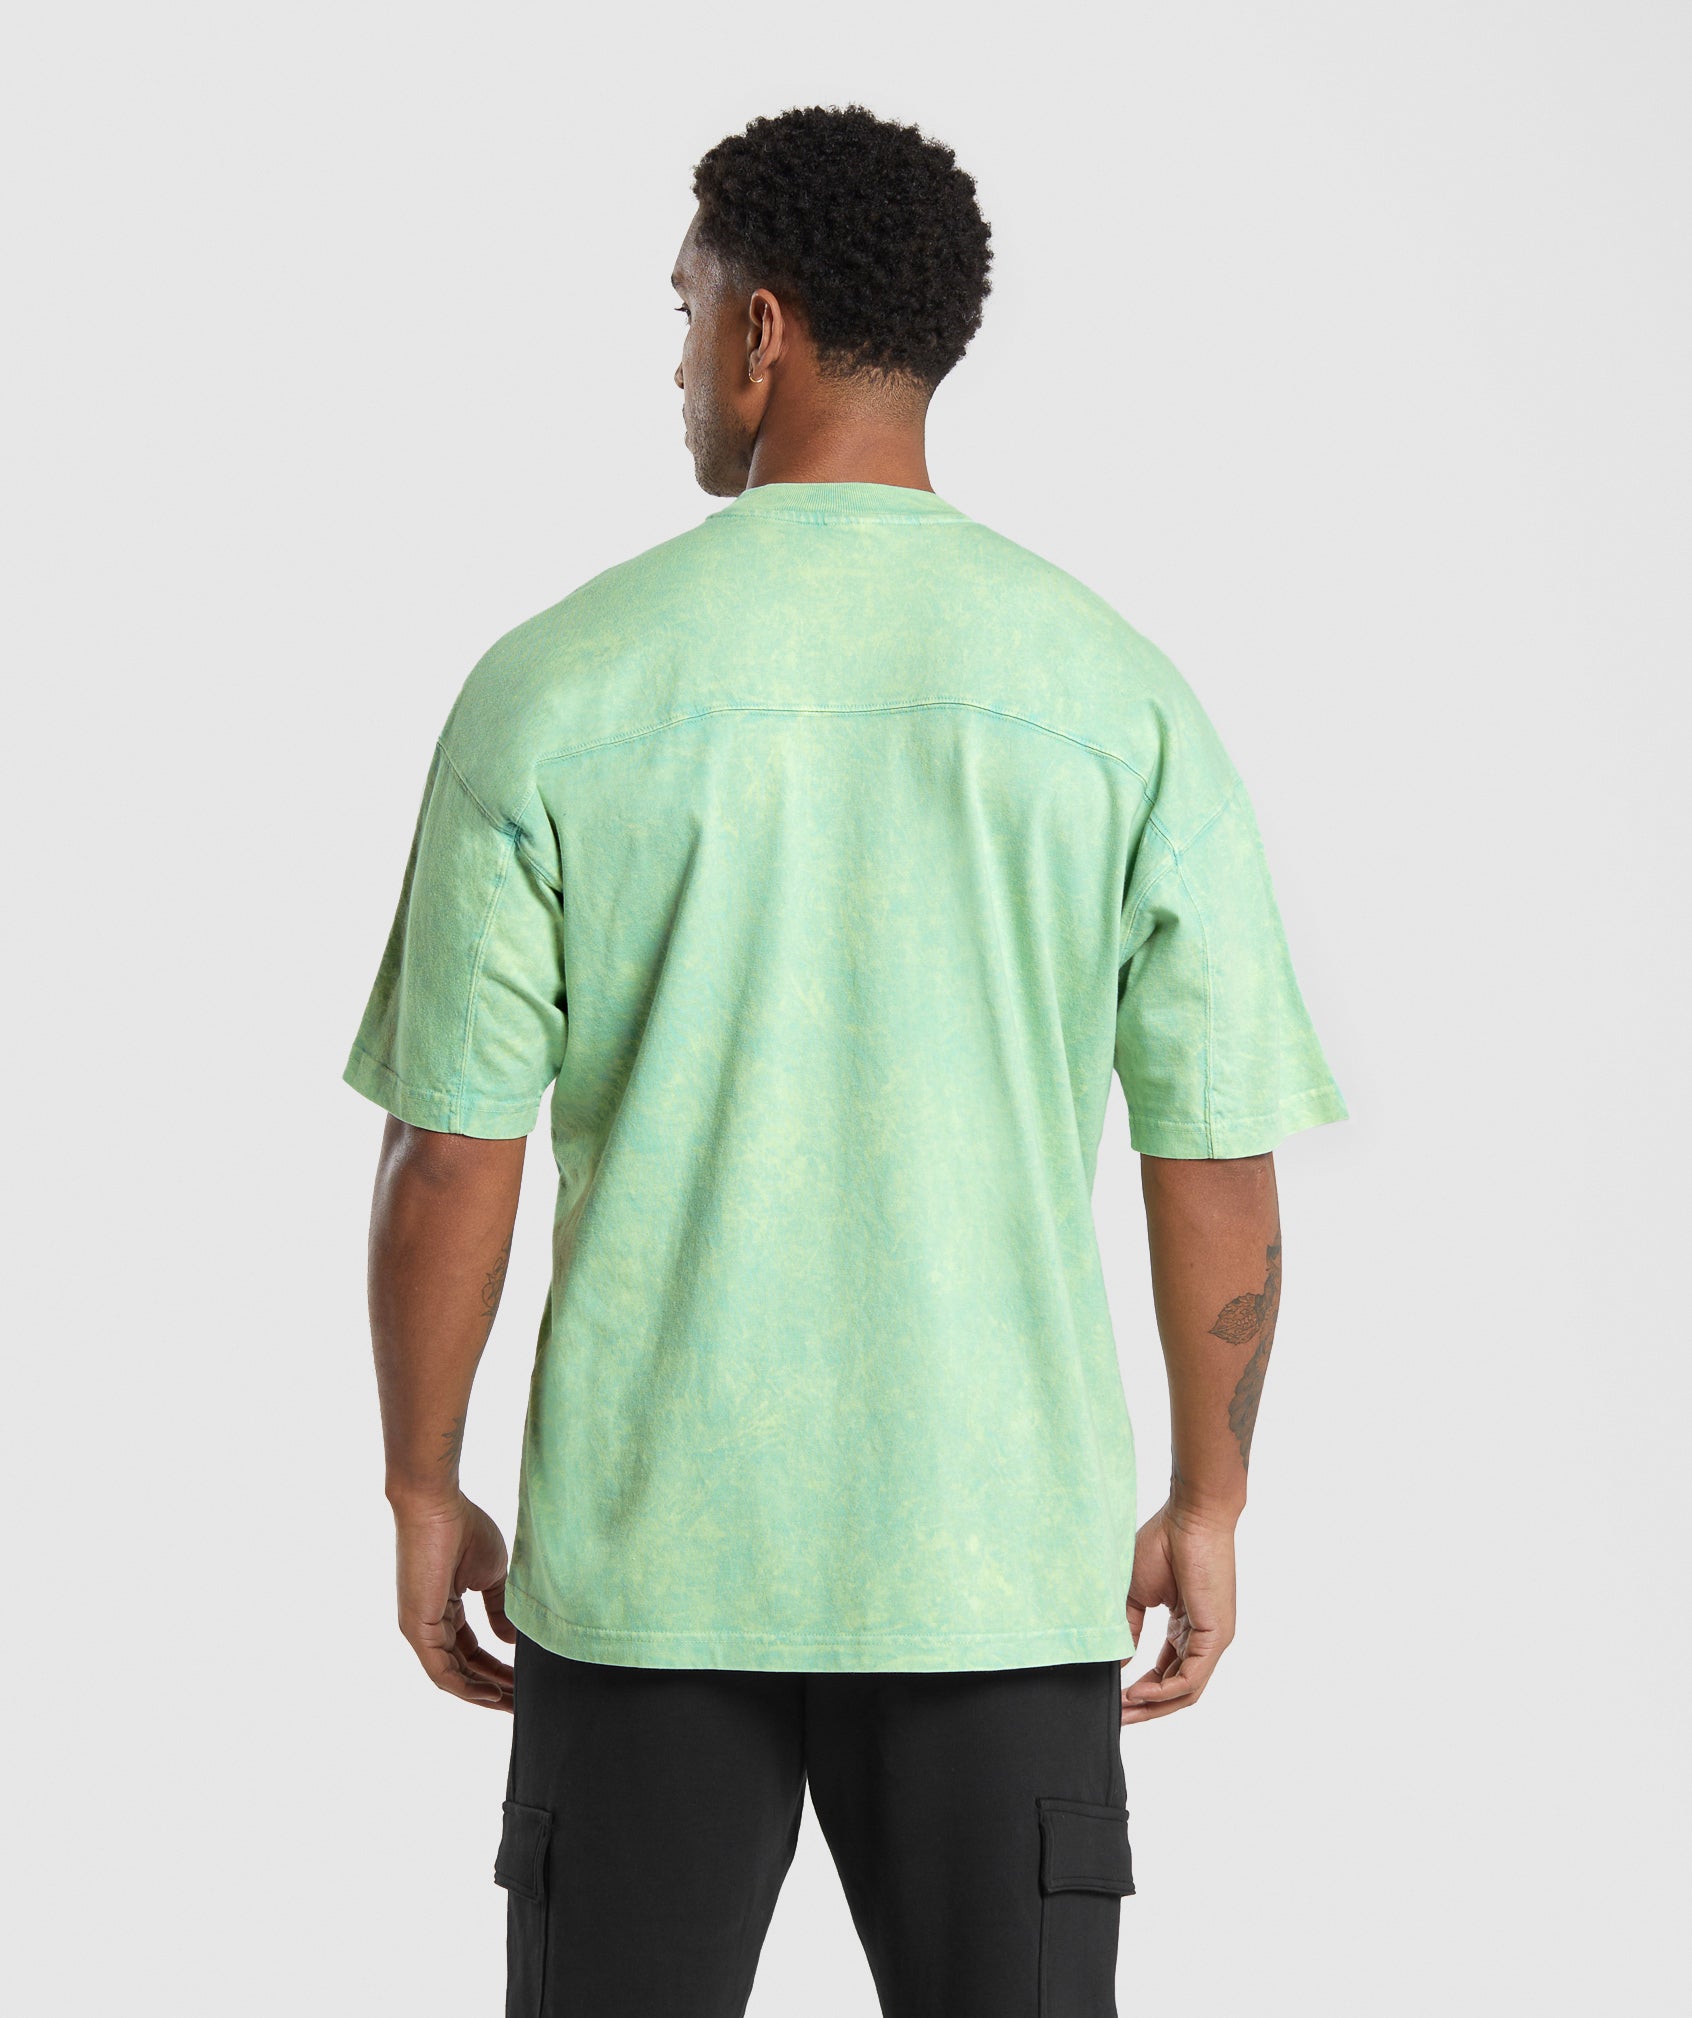 Rest Day Washed T-Shirt in Lido Green - view 2